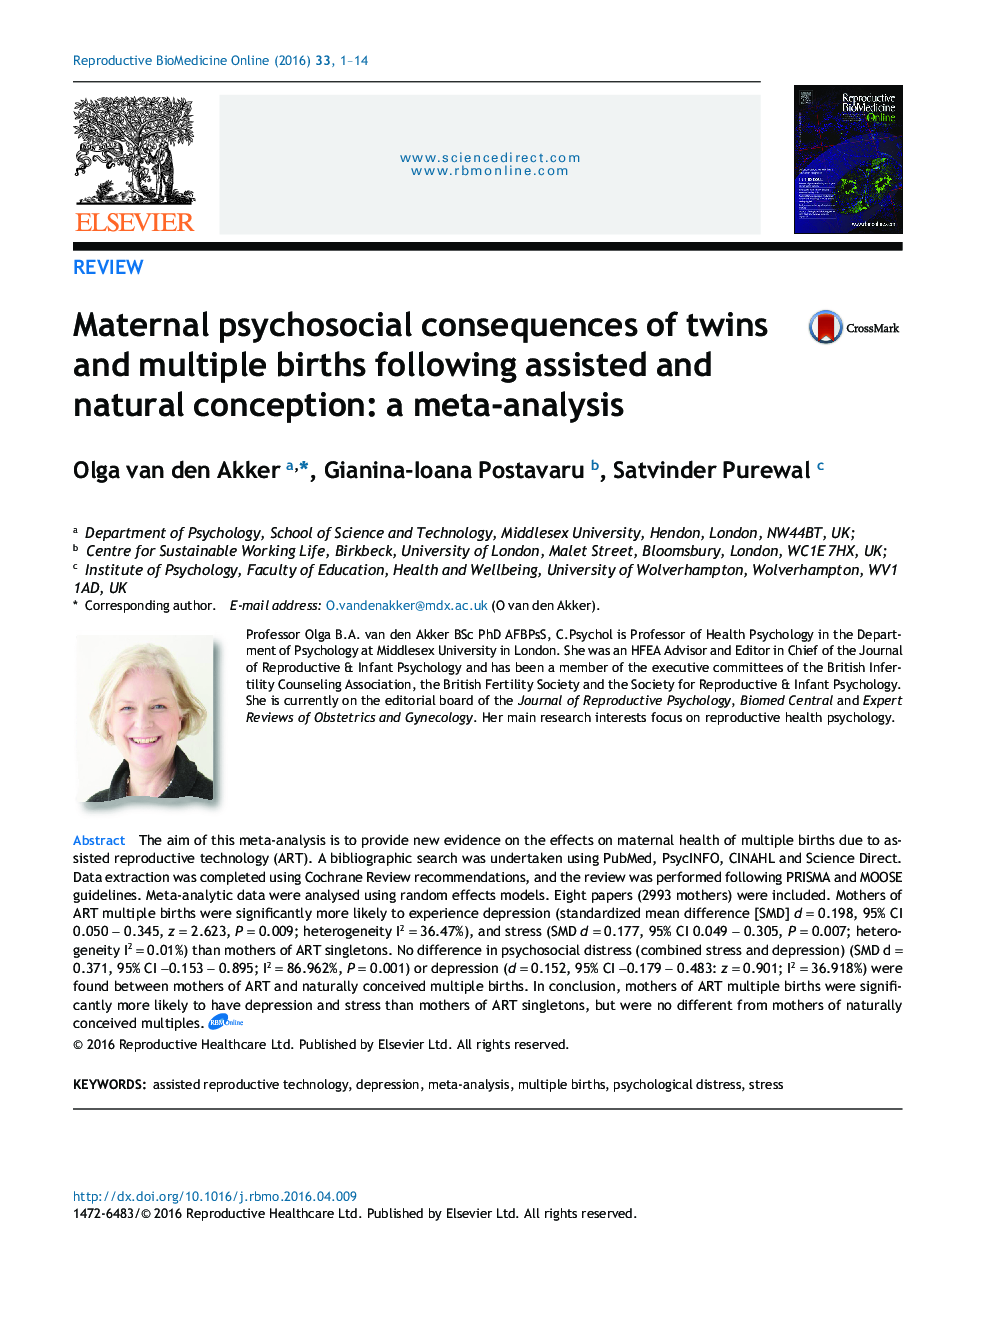 Maternal psychosocial consequences of twins and multiple births following assisted and natural conception: a meta-analysis